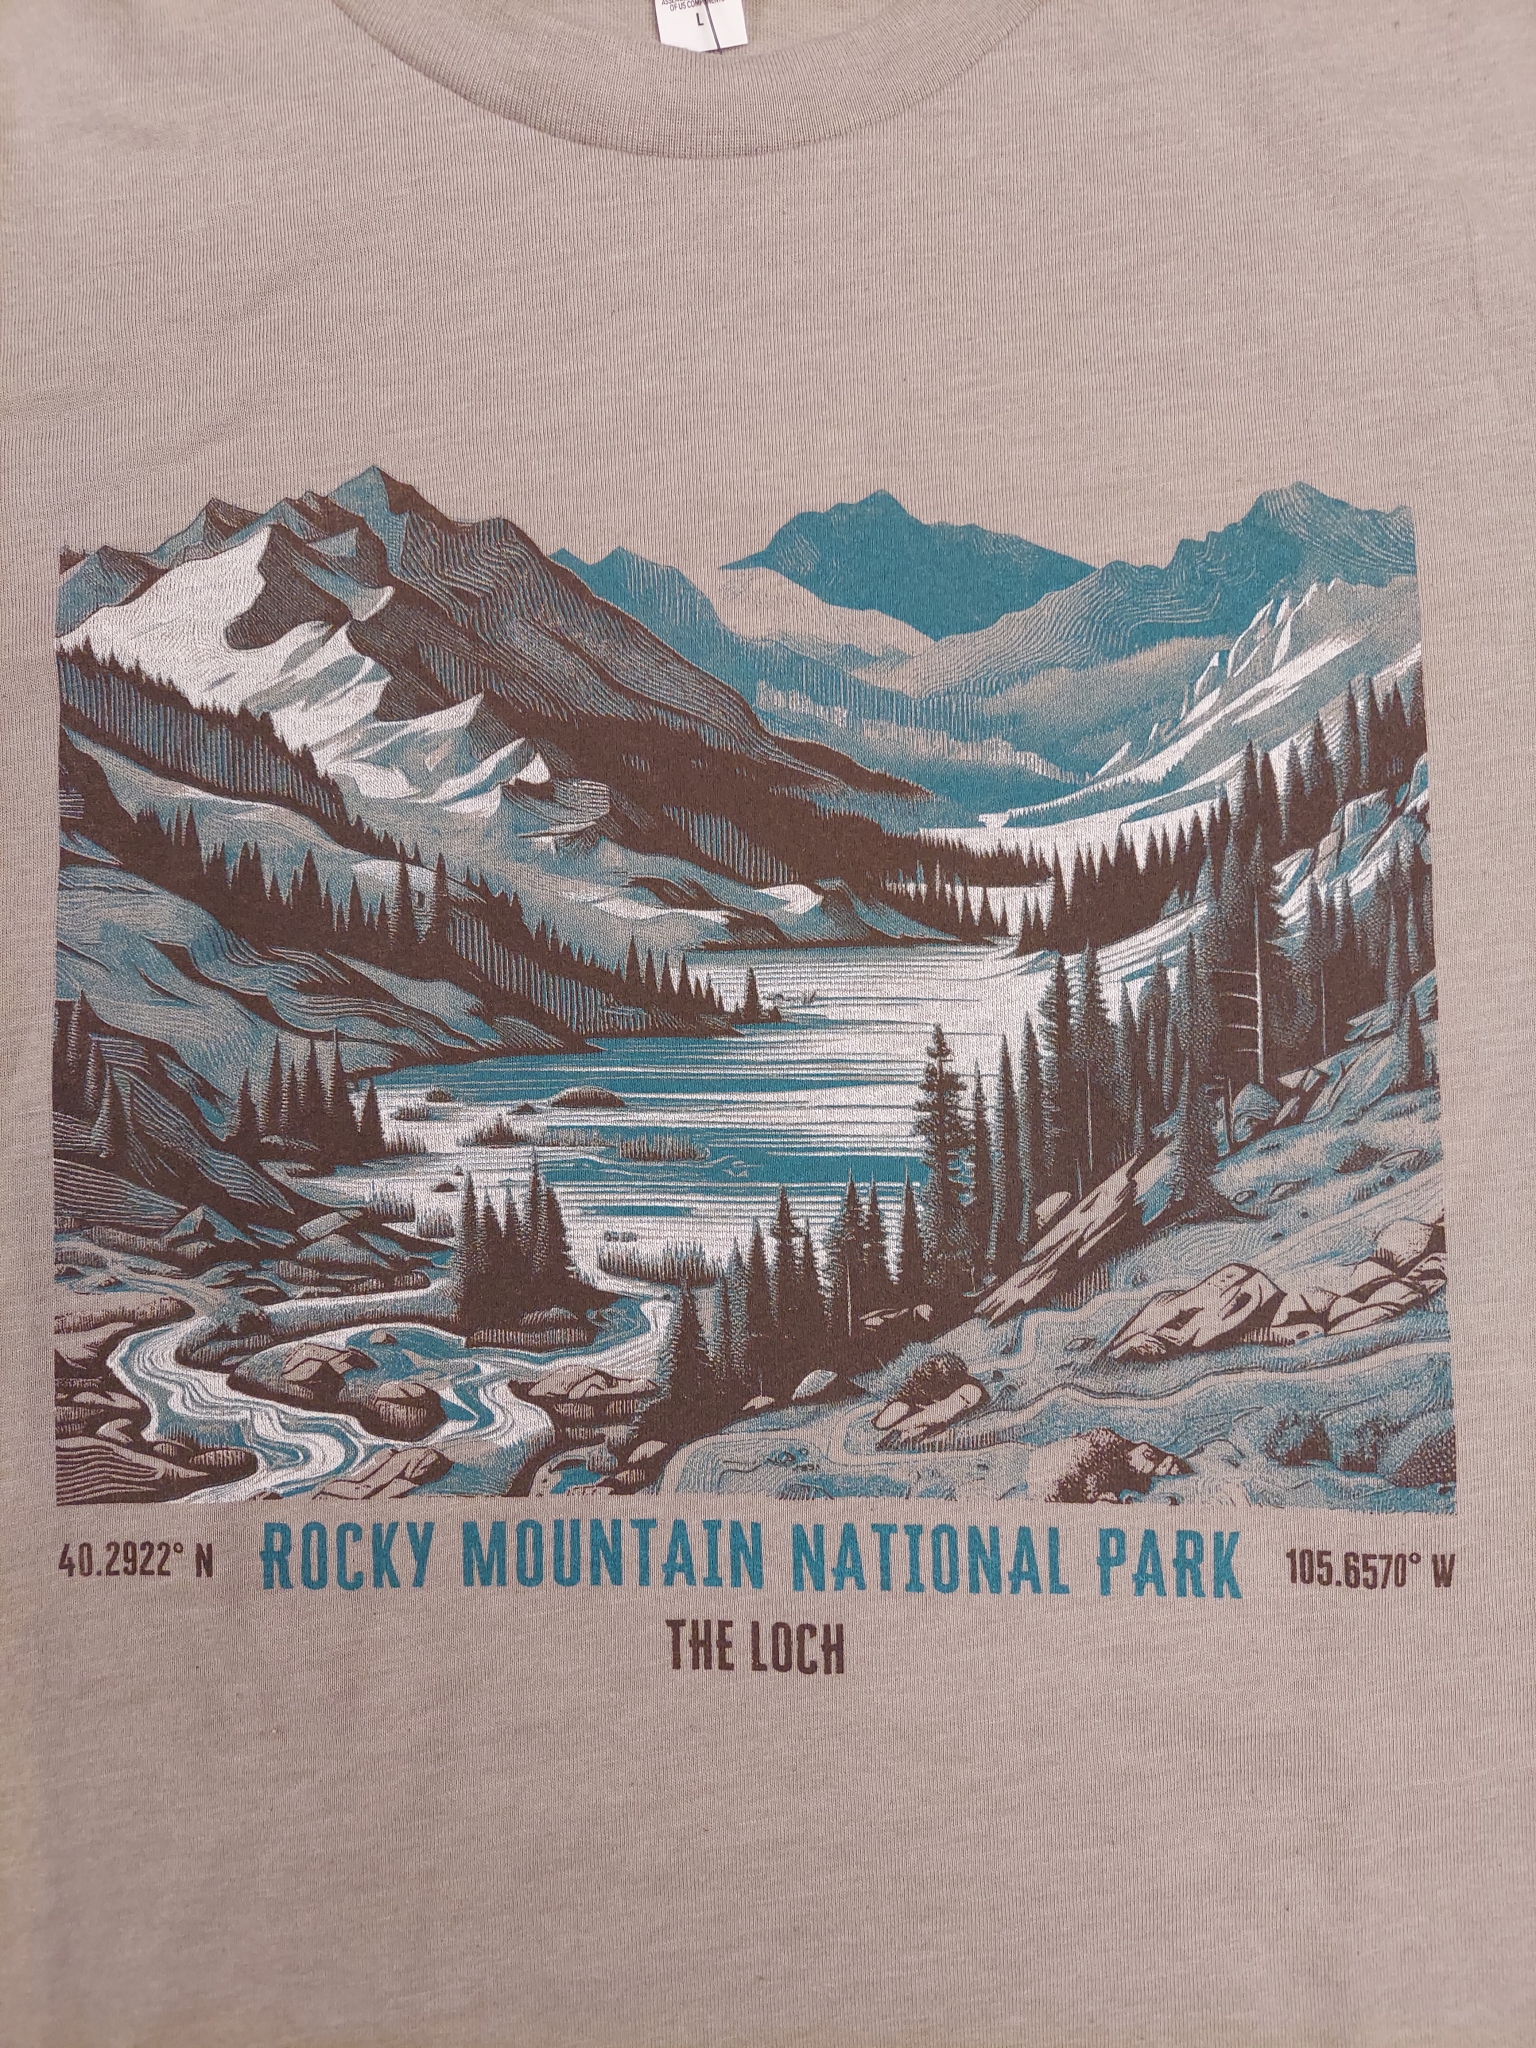 A T-Shirt - RMNP The Loch Vale featuring a scenic illustration of Rocky Mountain National Park's The Loch, with coordinates 40.2922° N, 105.6570° W depicted below.